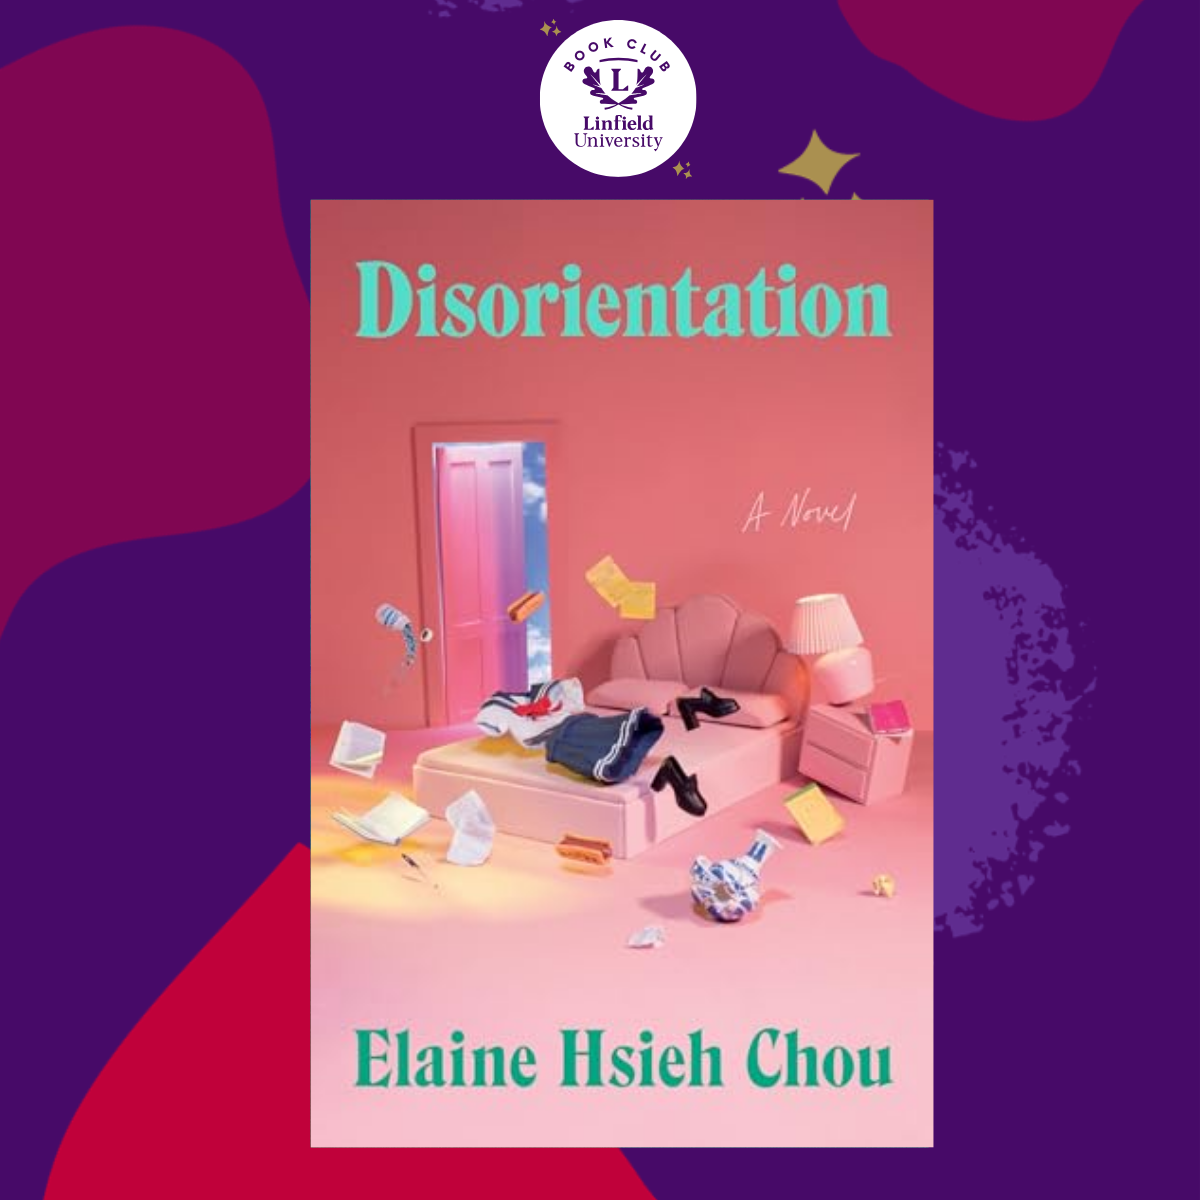 The cover of "Disoriented" by Elaine Hsieh Chou is displayed over a purple background